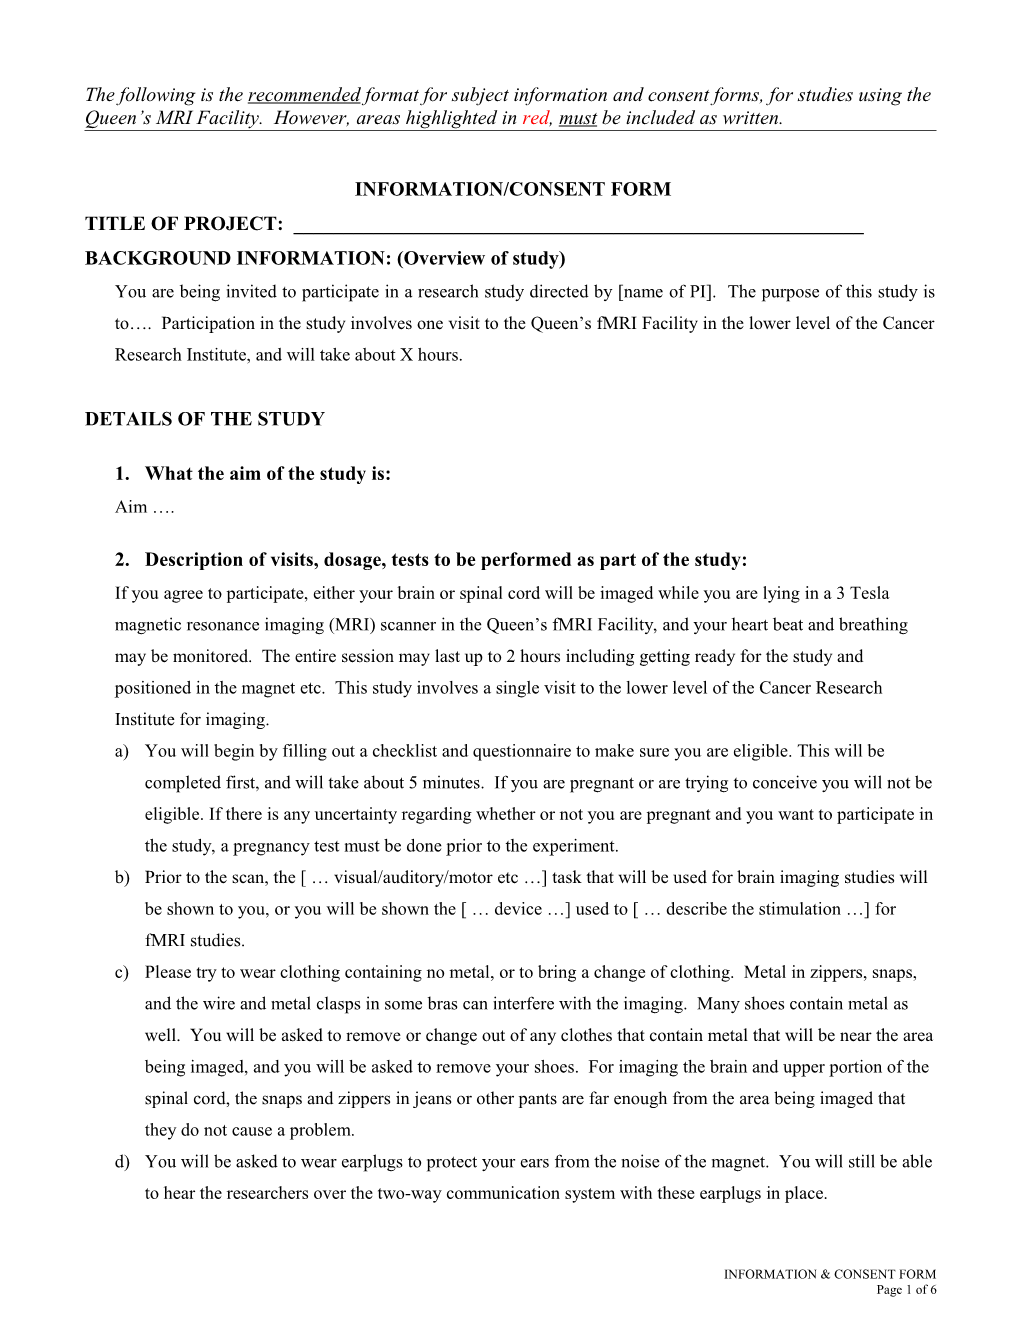 Information/Consent Form